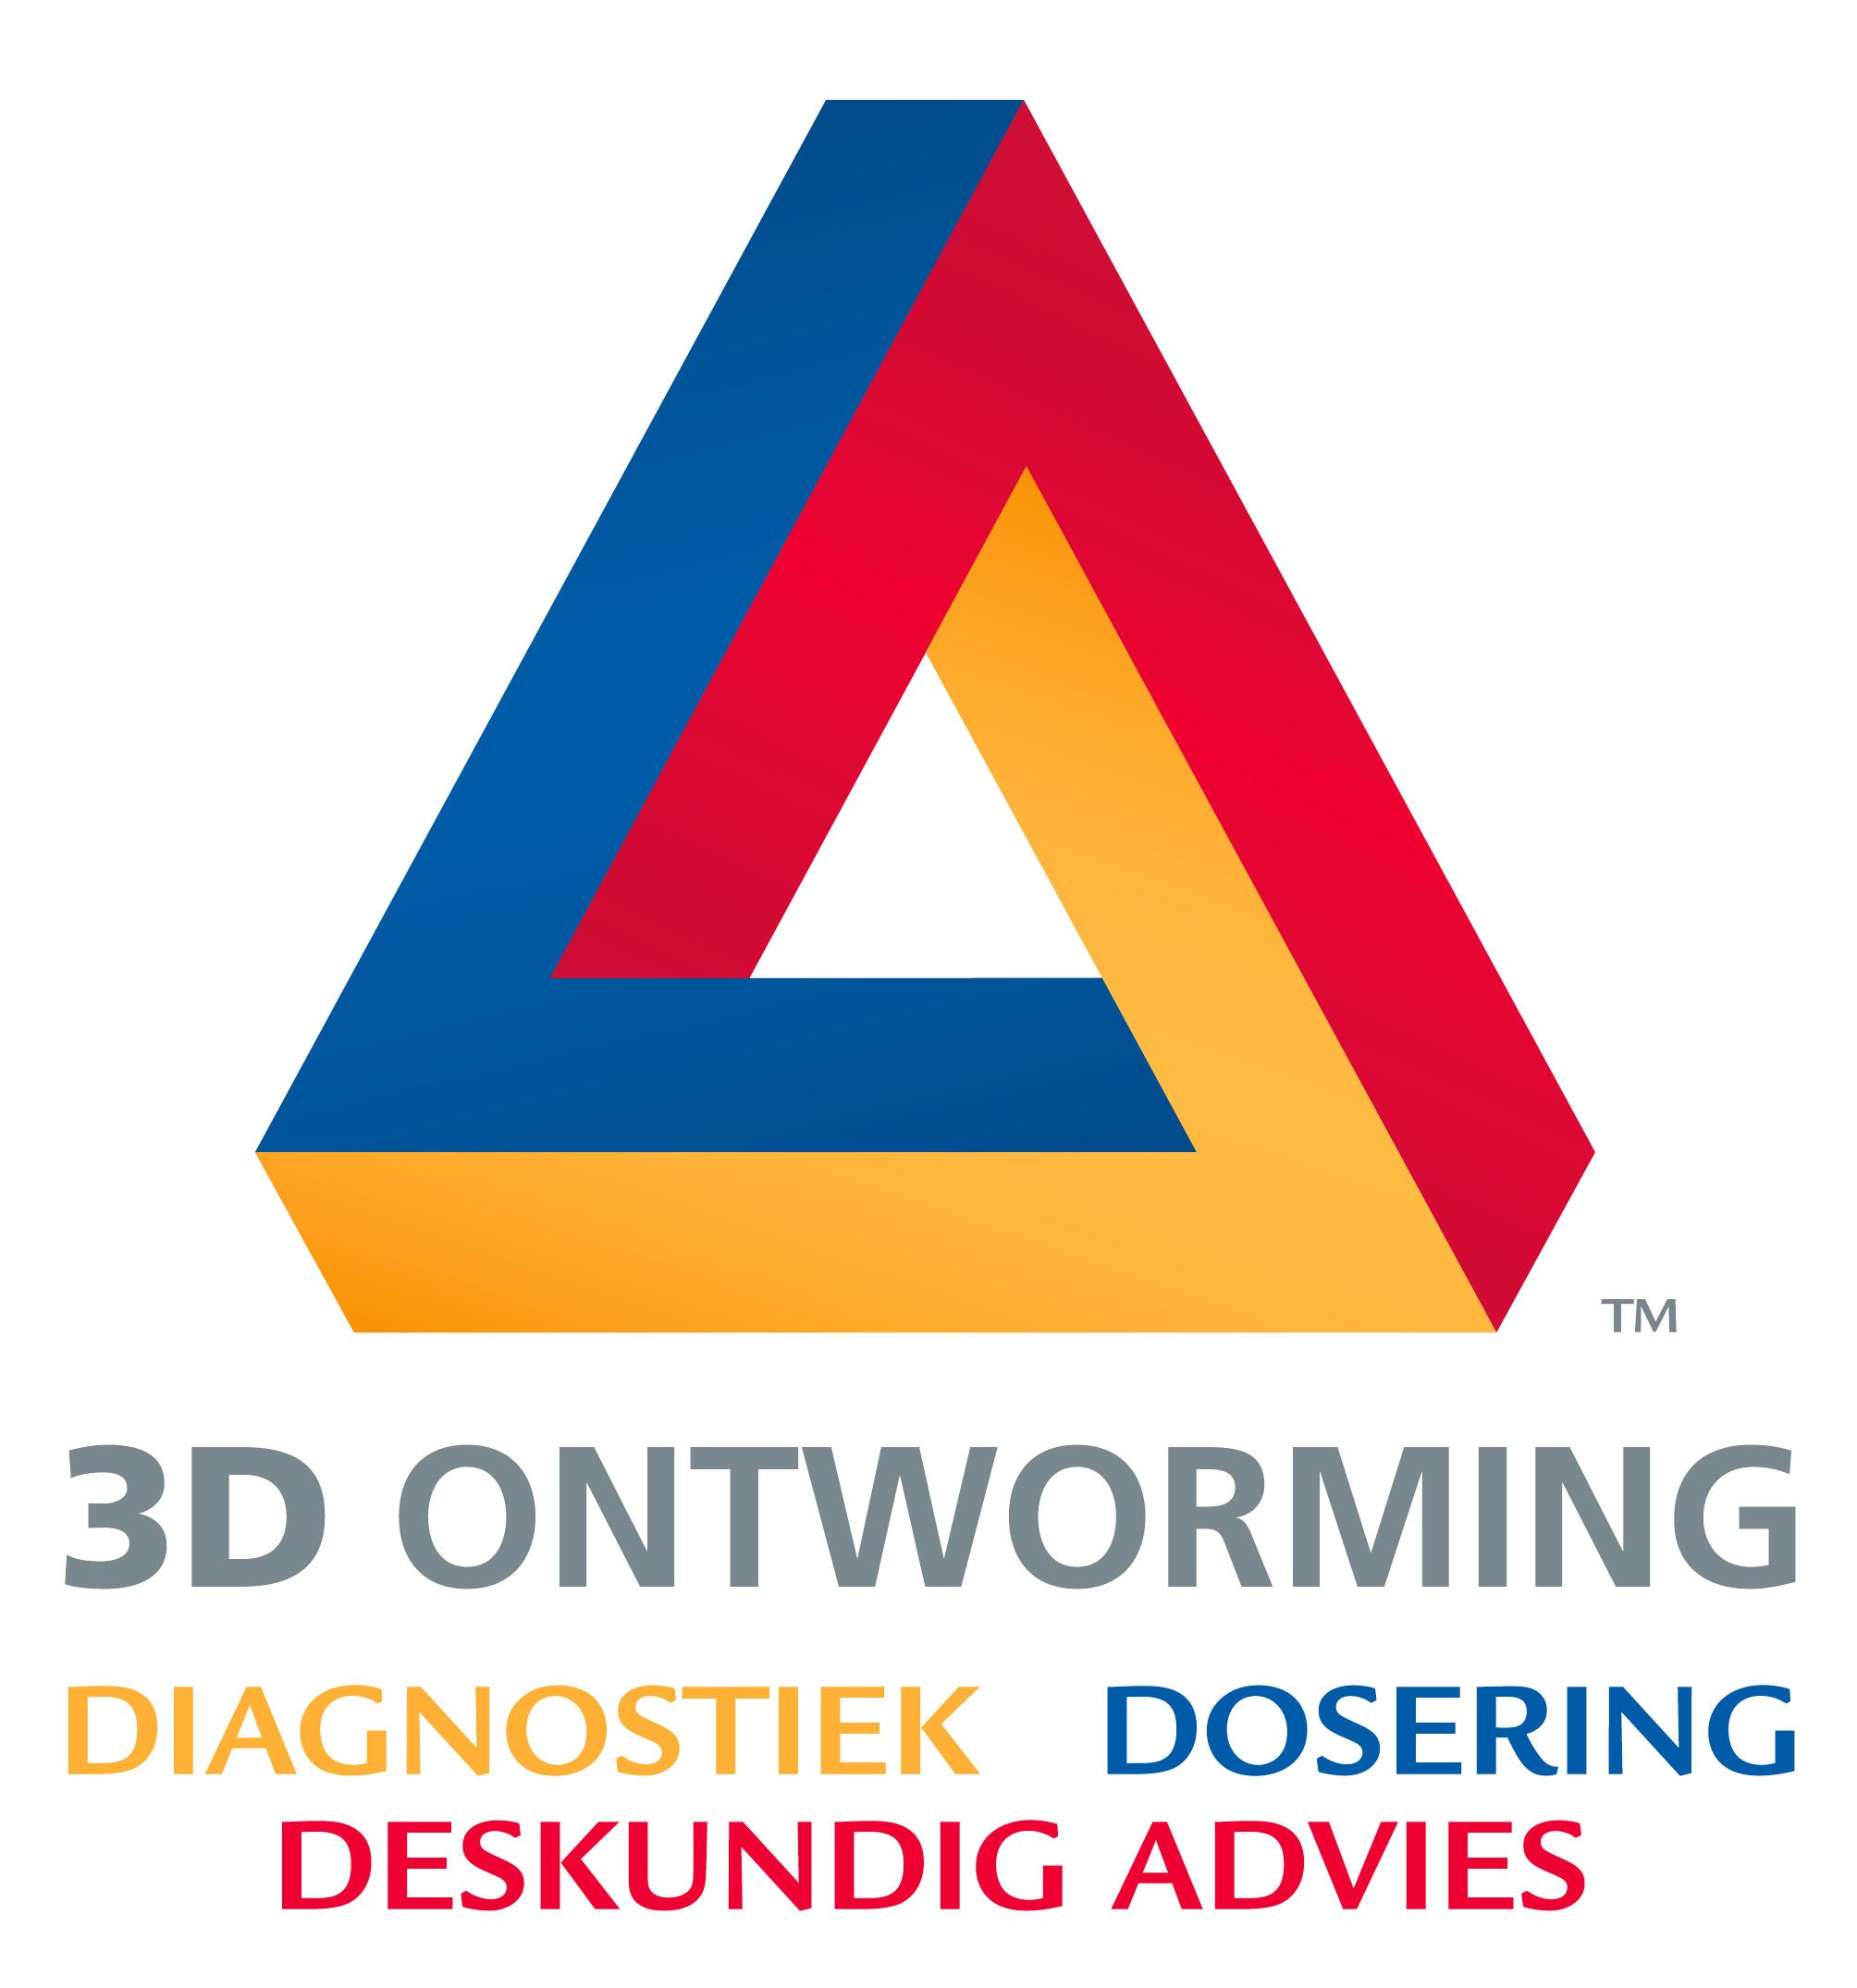 3D ontworming 